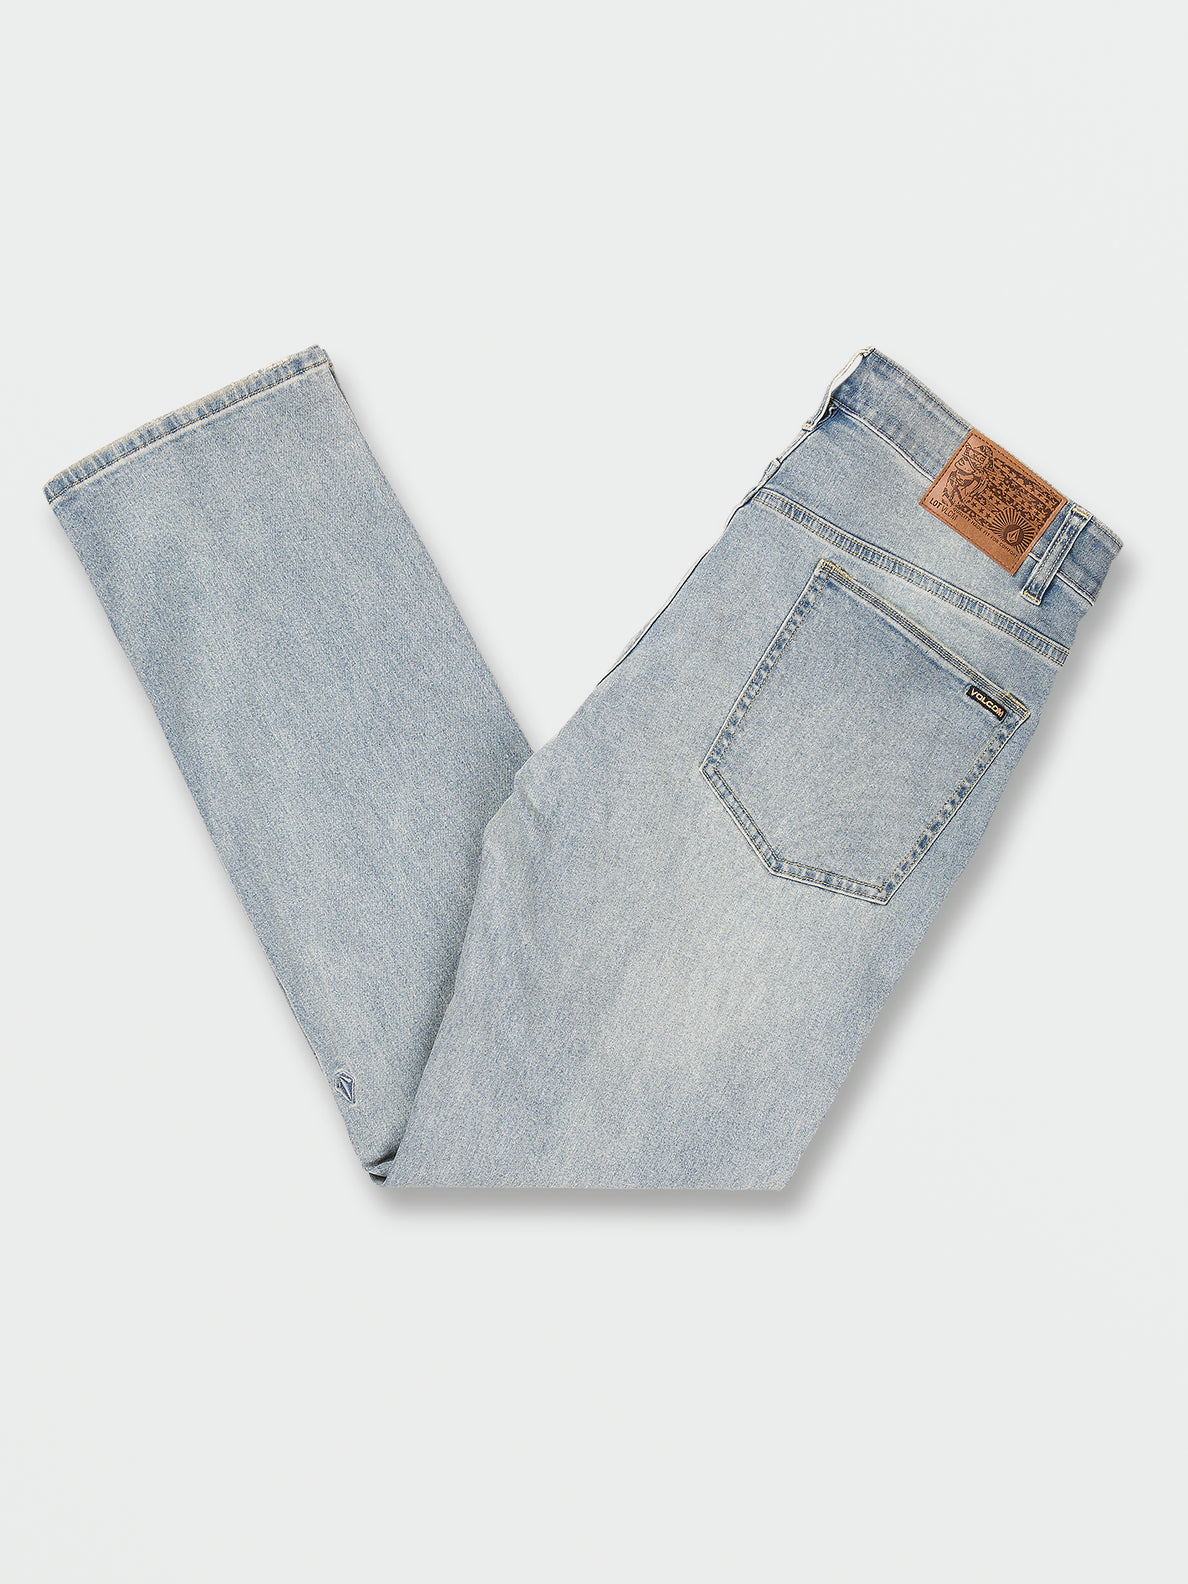 SOLVER MODERN FIT JEANS - WIV